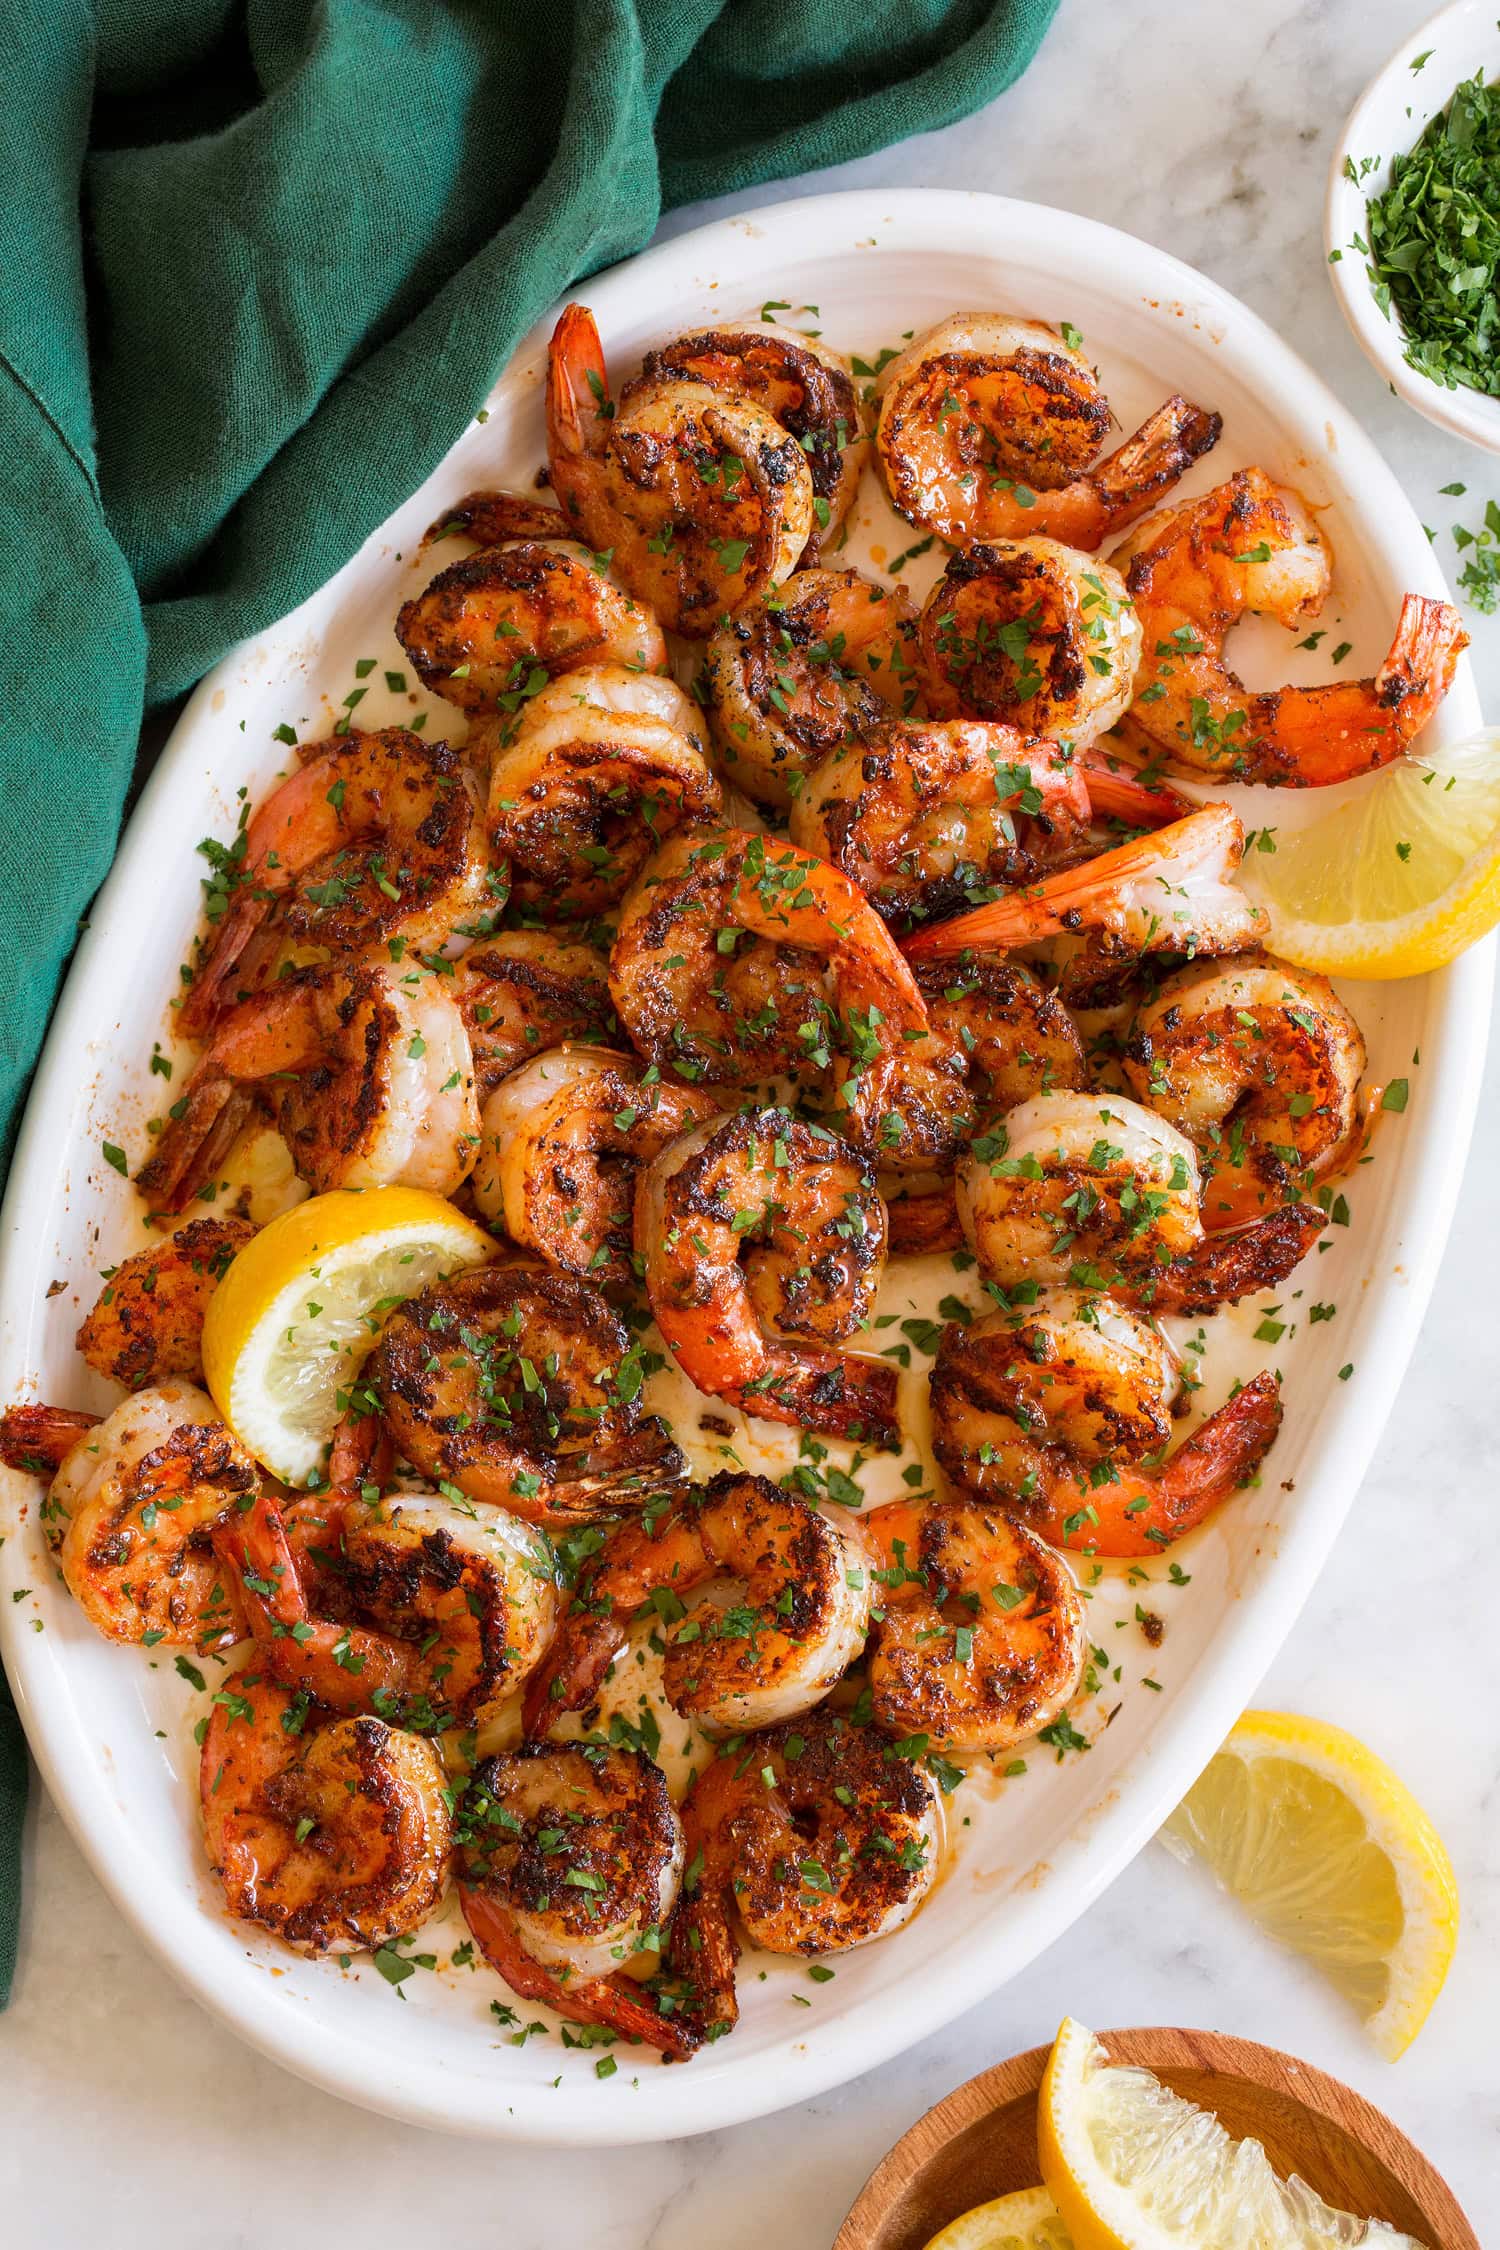 Blackened shrimp garnished with parsley shown on a white oval platter with lemon slices.